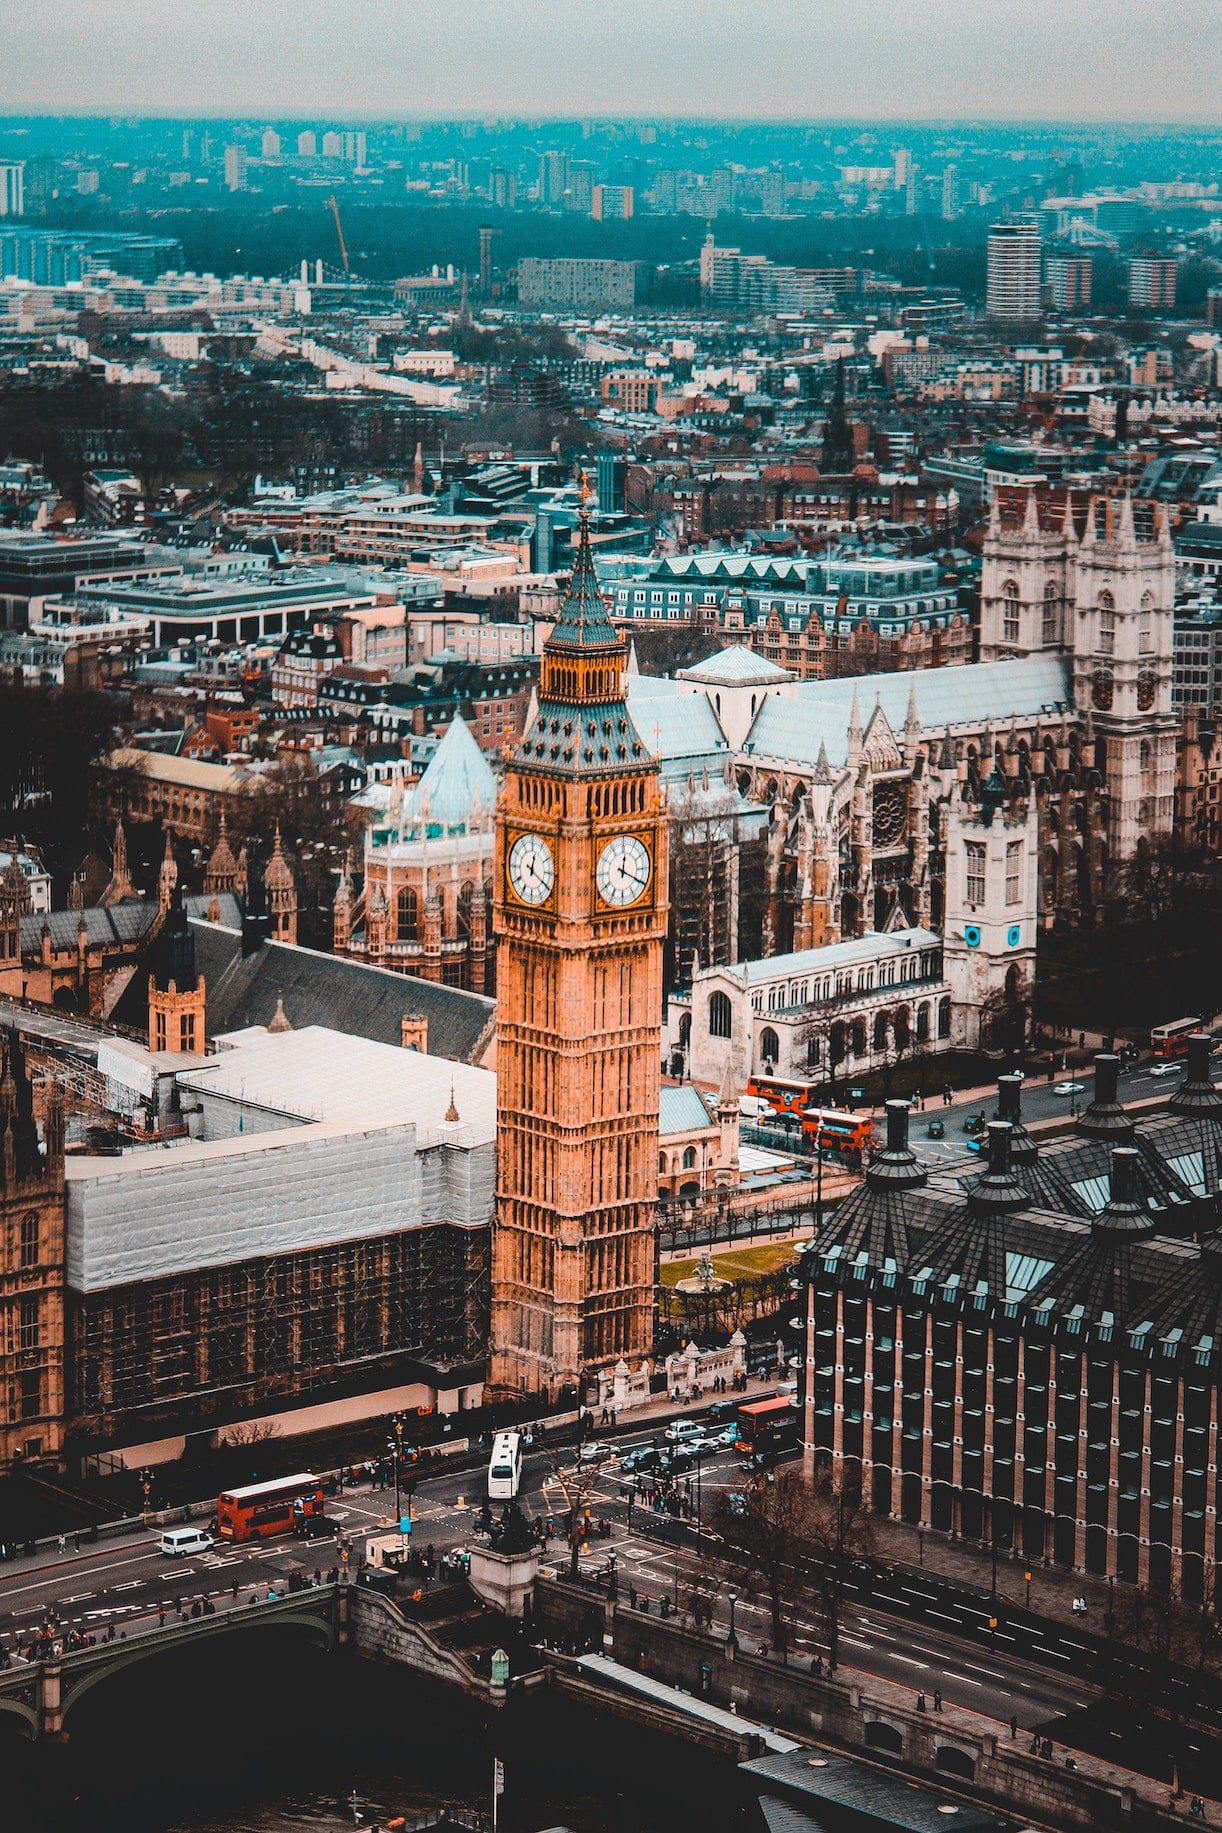 London Is One of the Oldest Cities in Europe